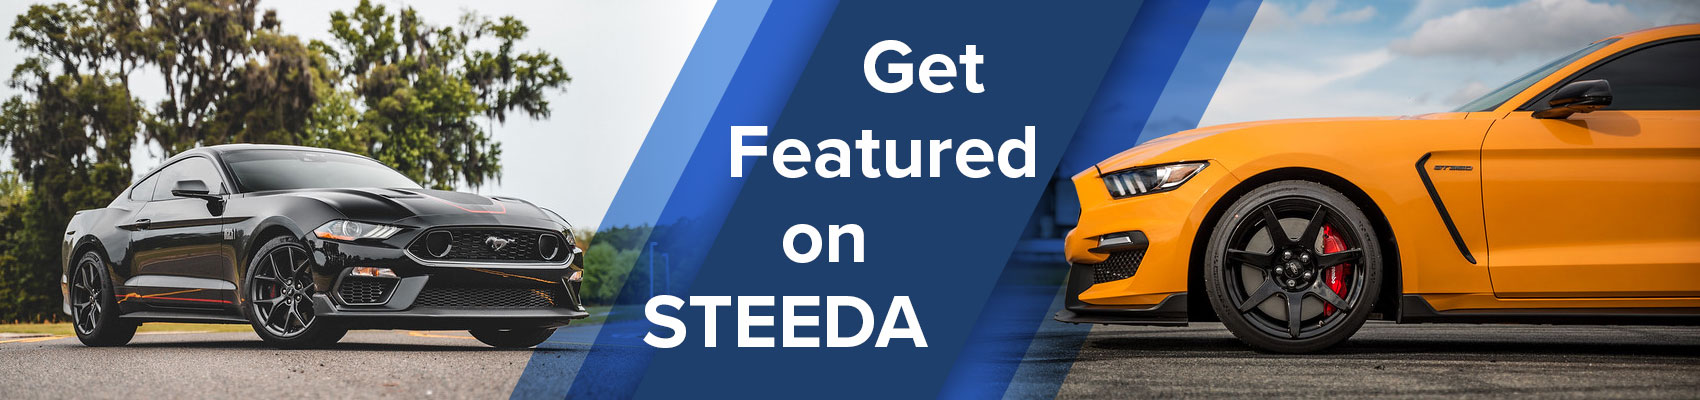 Get Featured At Steeda